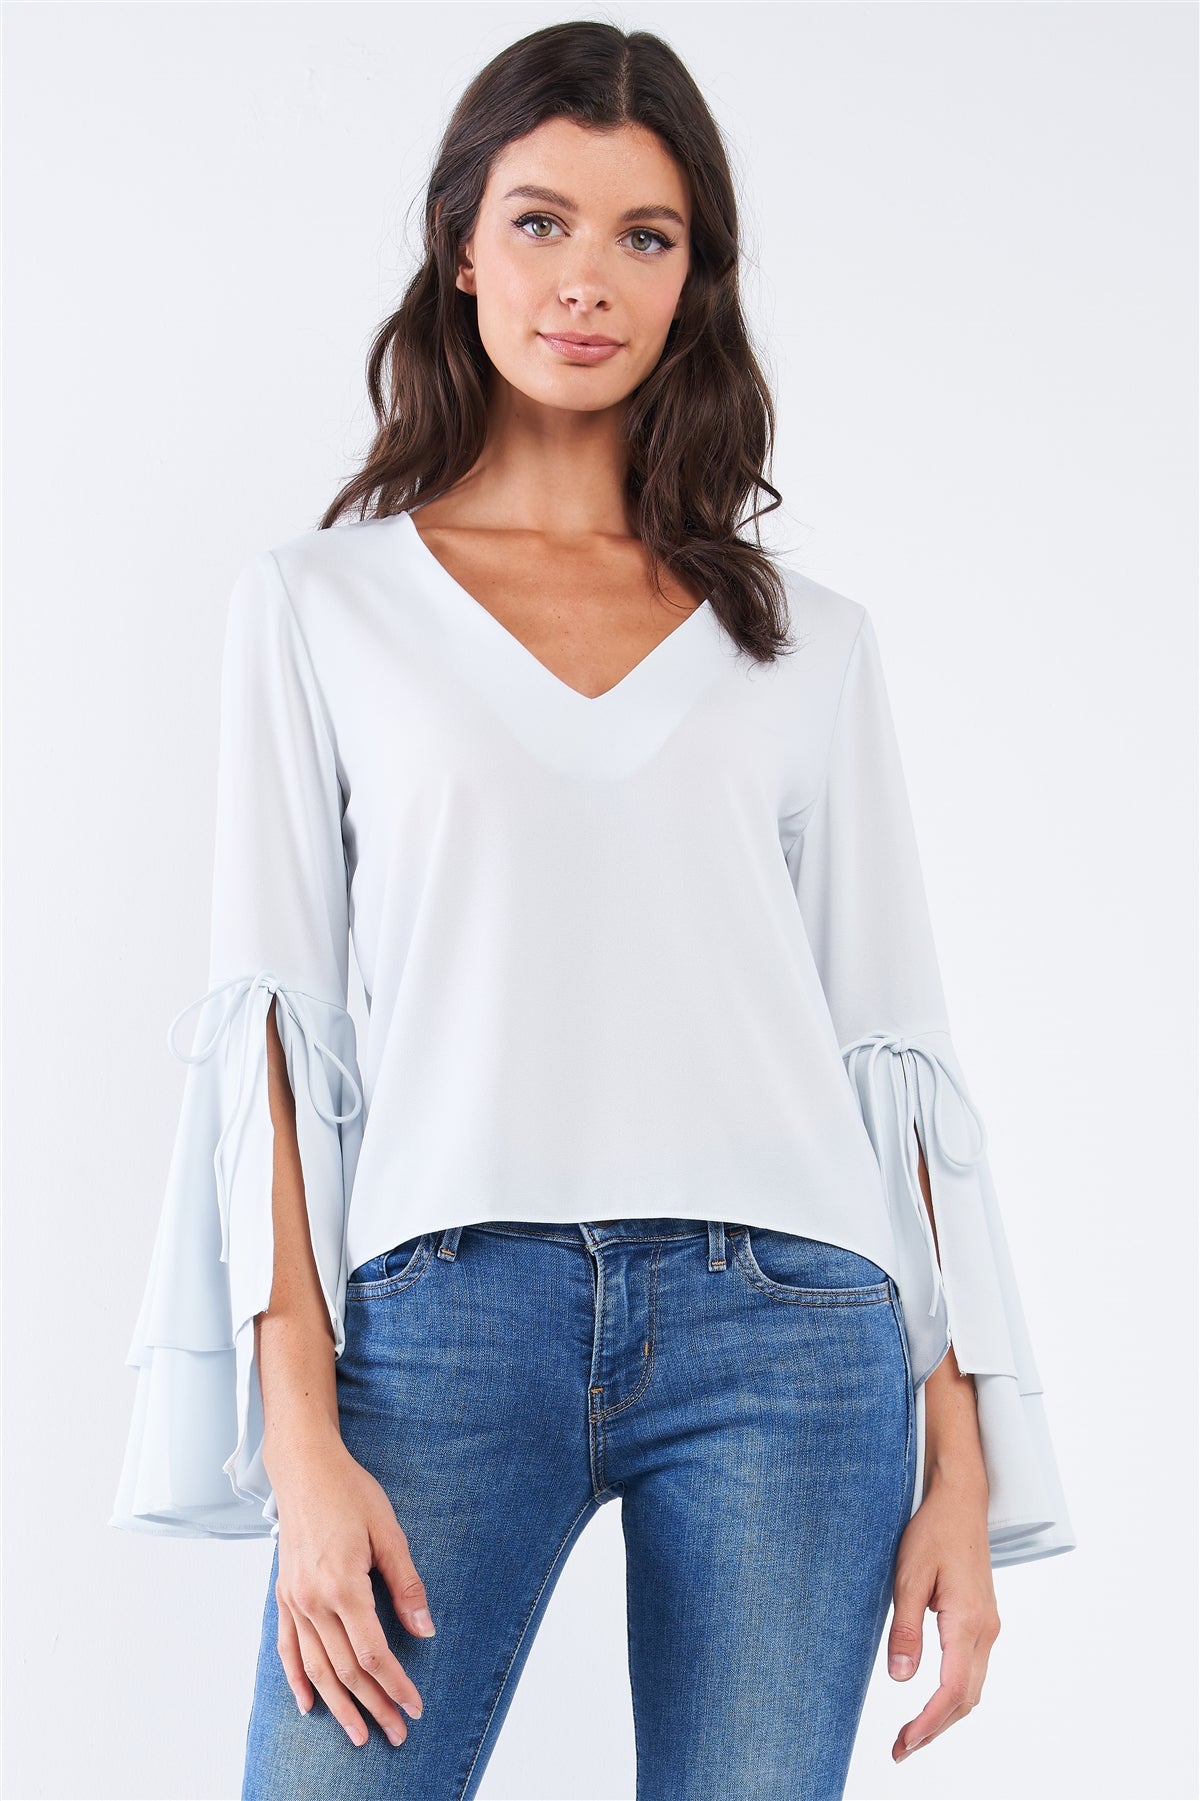 Bluebell Frill Top